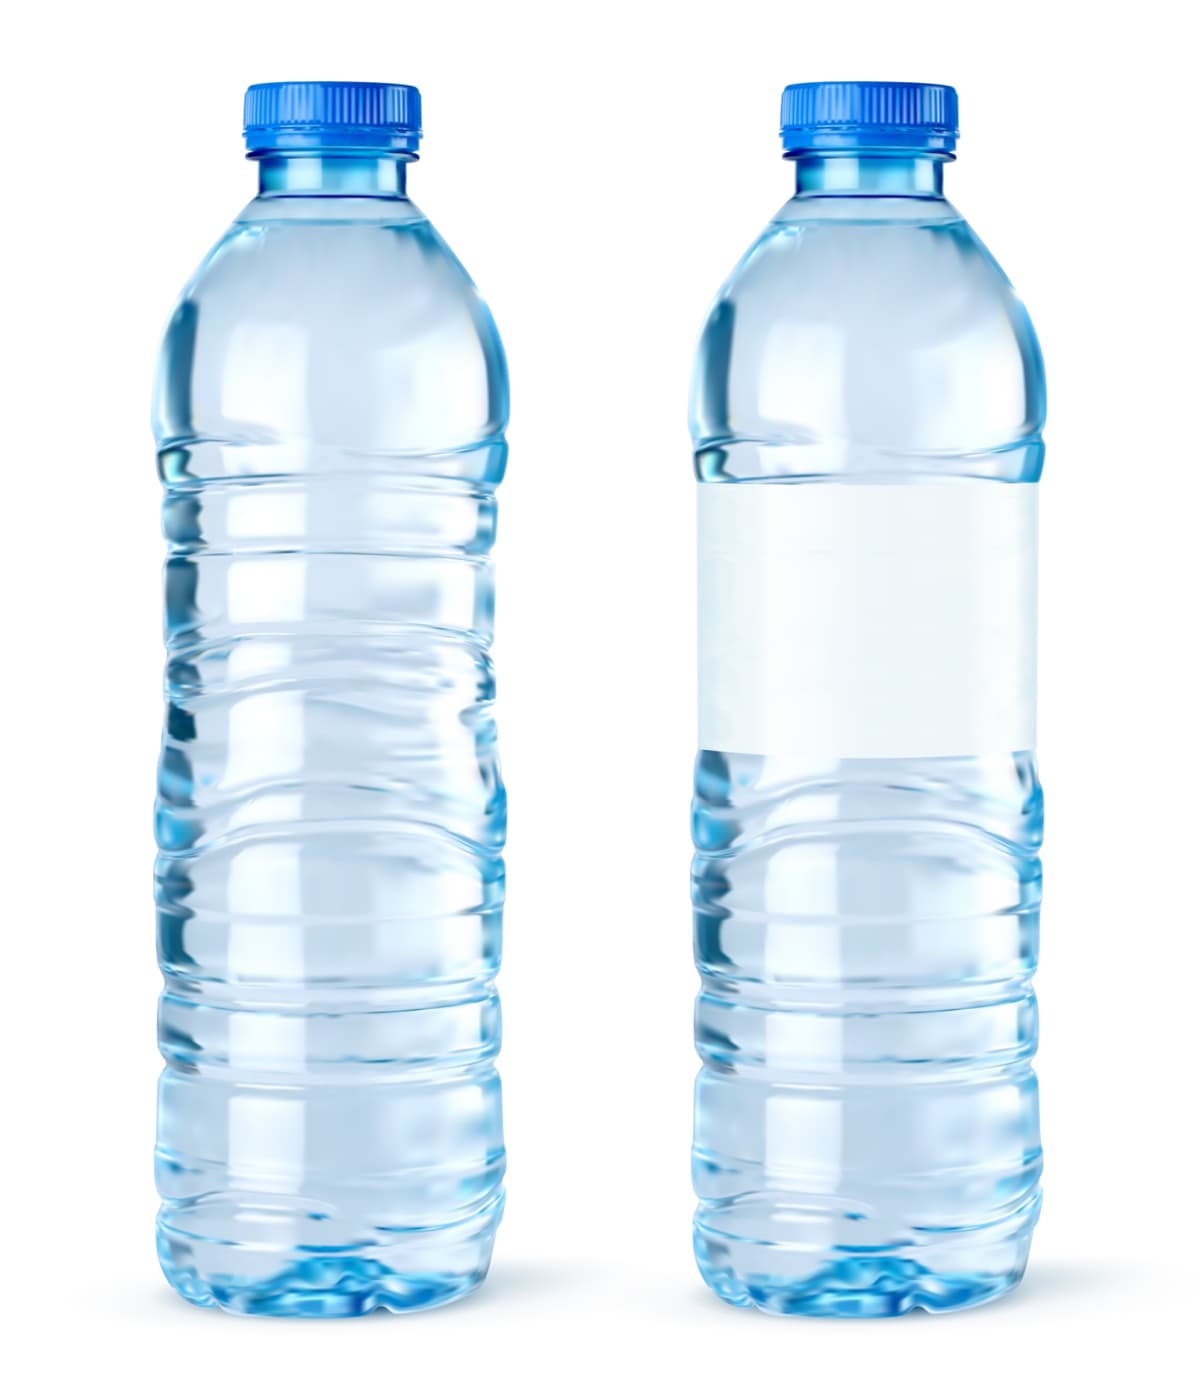 Plastic water bottles on a white background